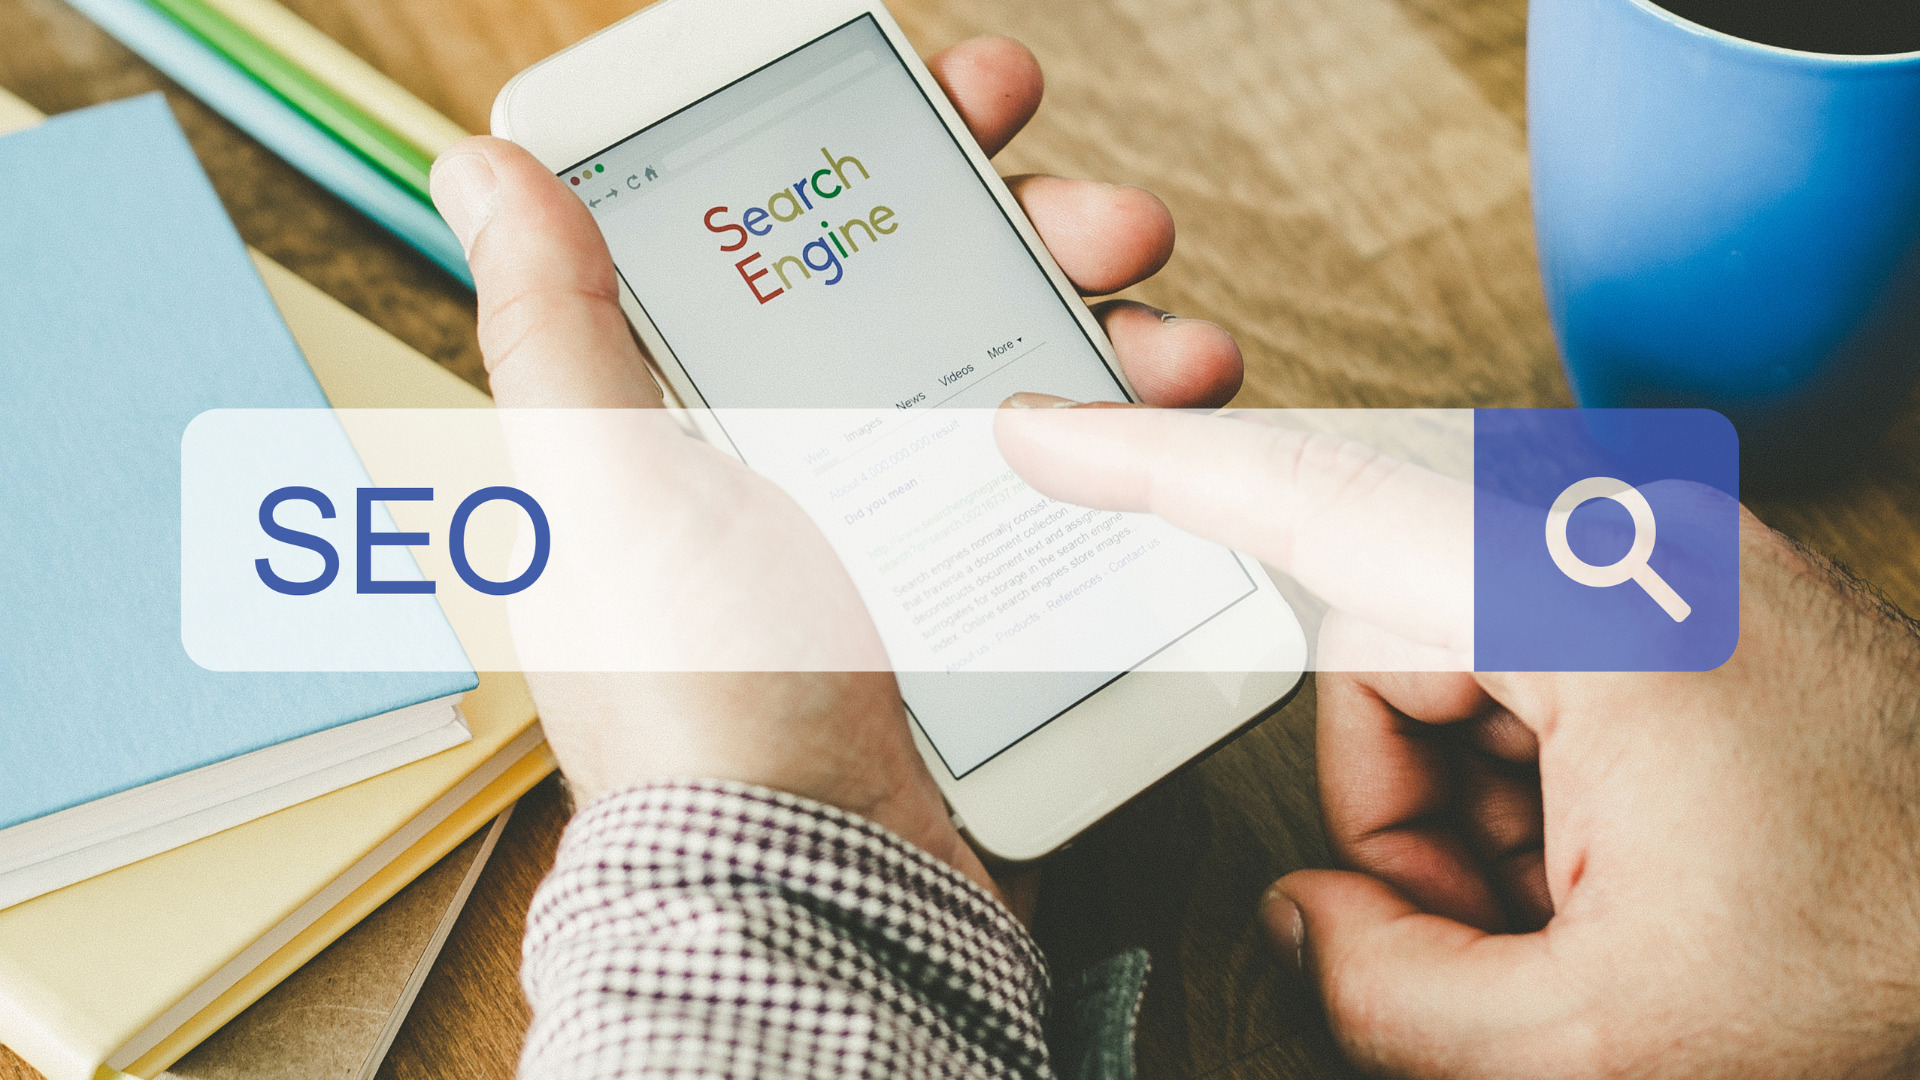 Ways To Be on Top of Google Search Results